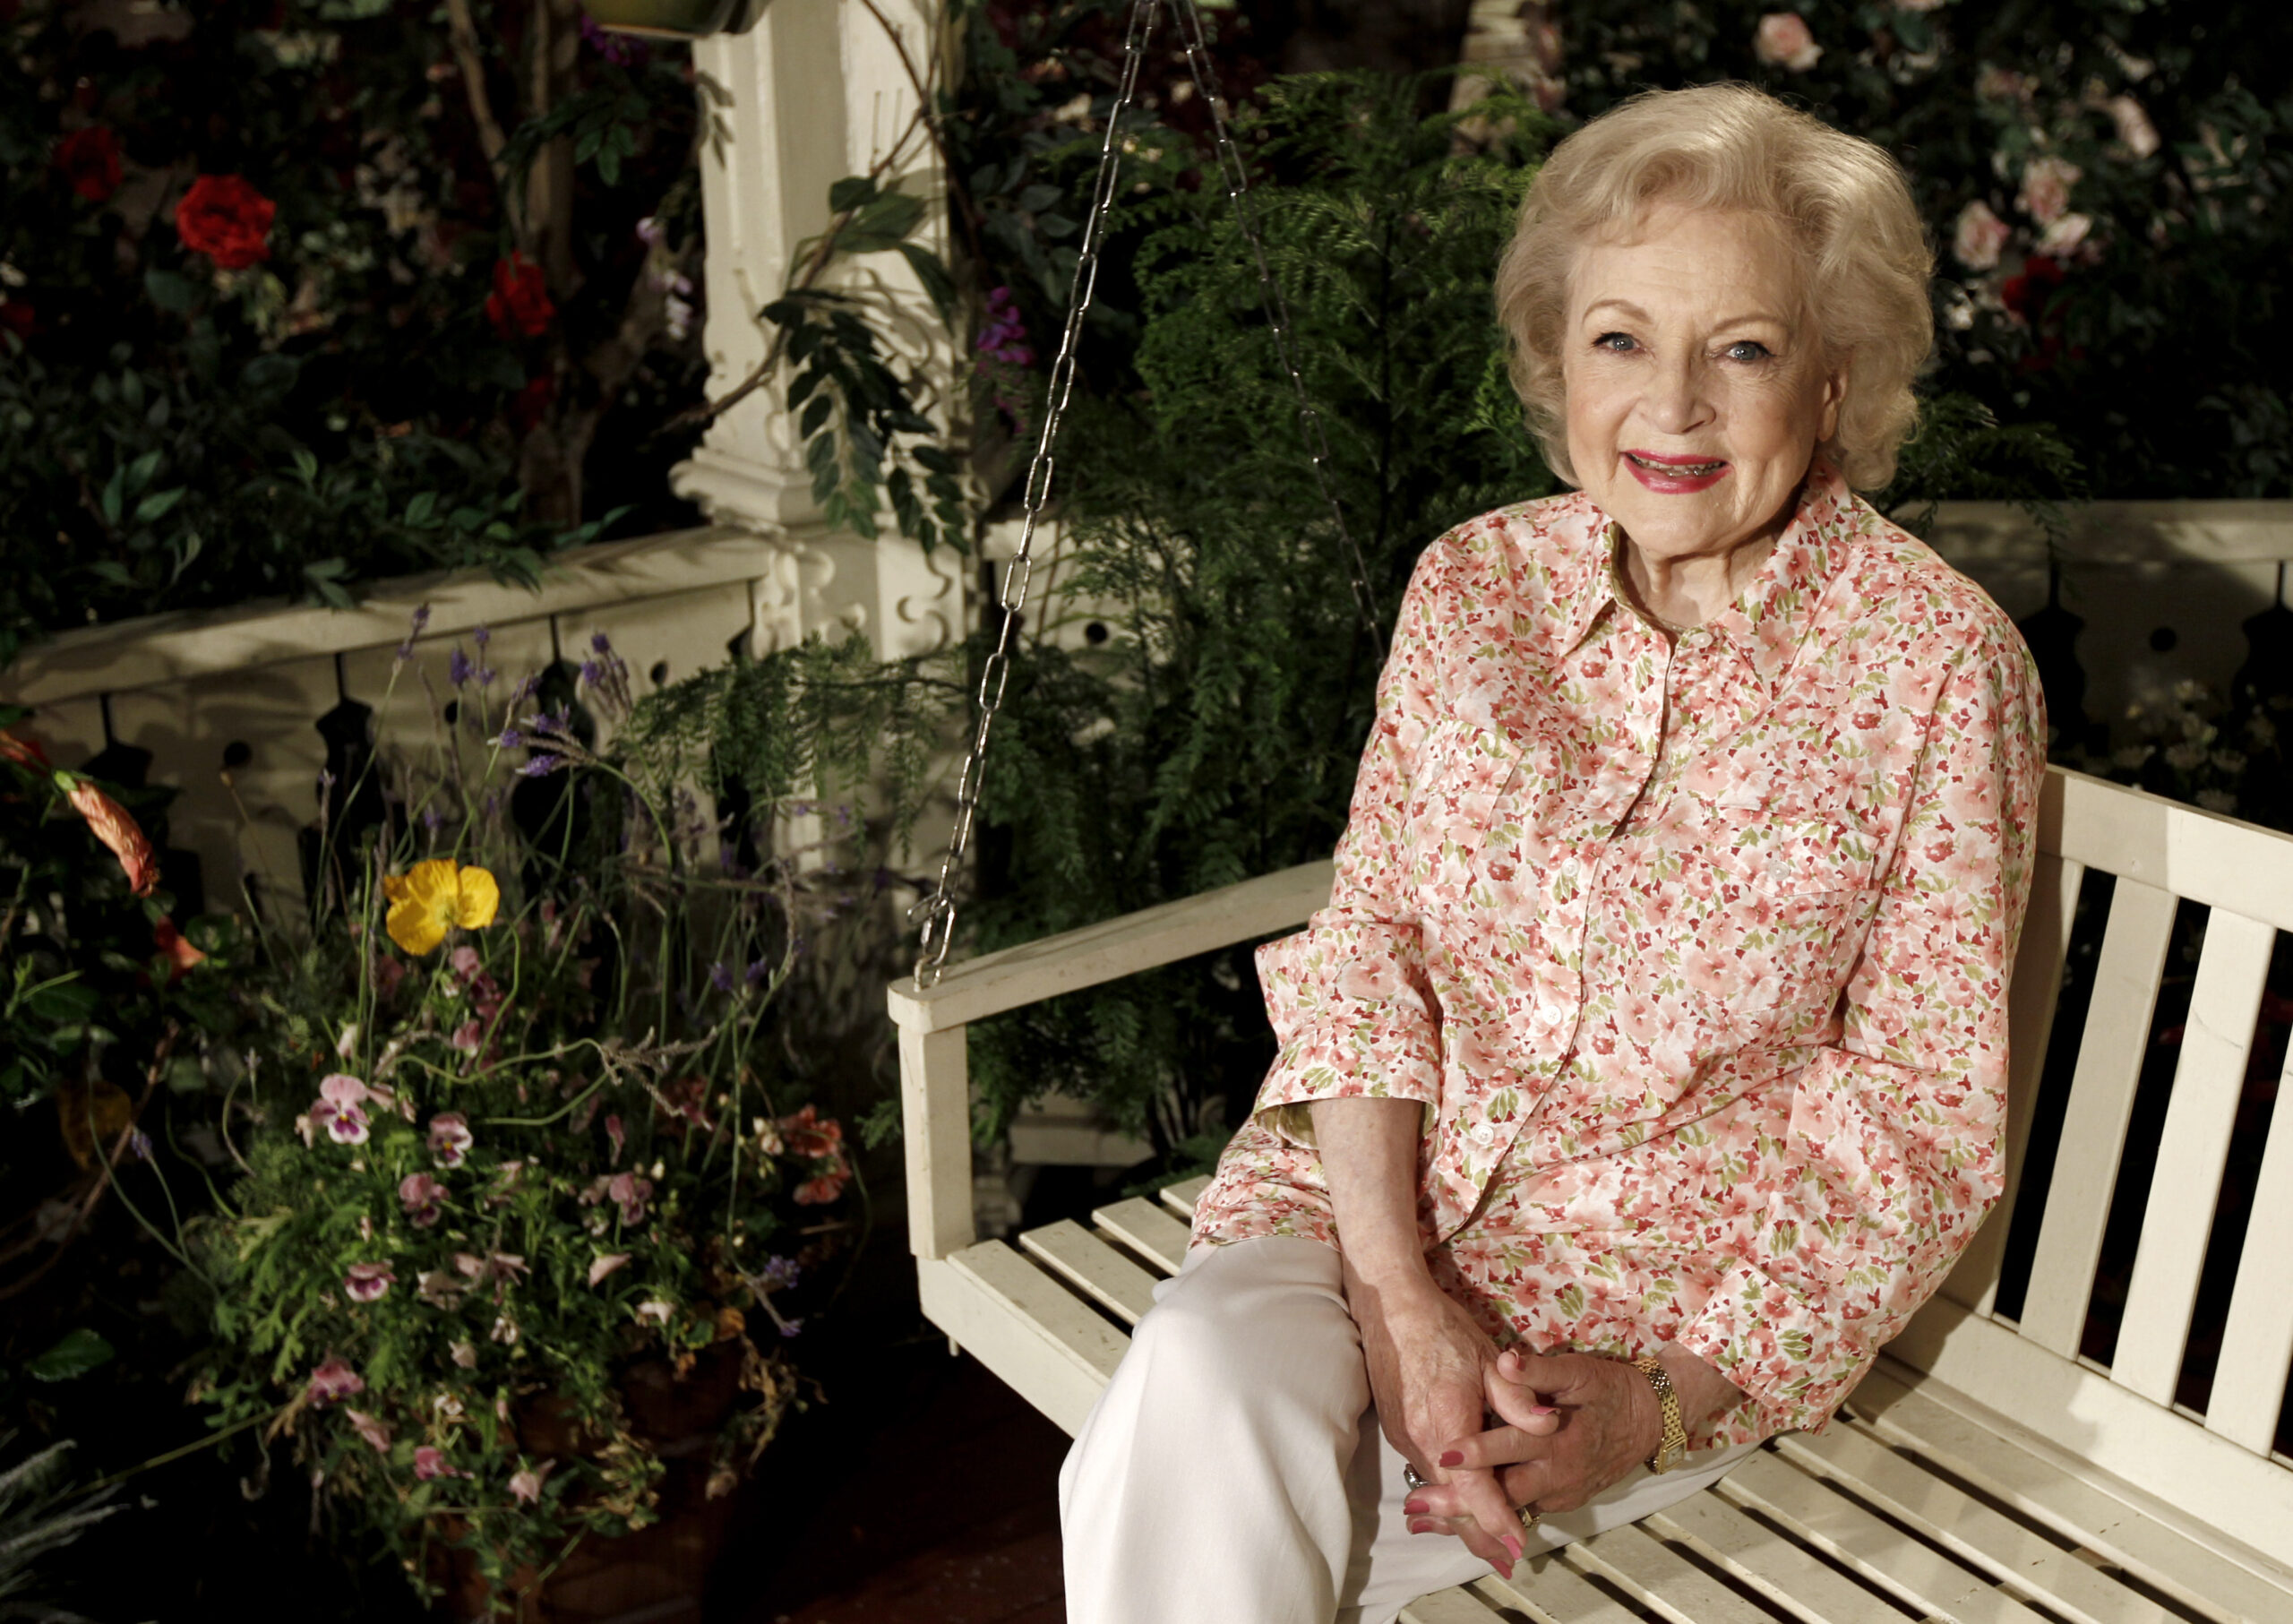 FILE - Actress Betty White poses for a portrait on the set of the television show "Hot in Cleveland" in Studio City section of Los Angeles on Wednesday, June 9, 2010. White died from a stroke she had six days before her Dec. 31, 2021, death at age 99, according to her death certificate. (AP Photo/Matt Sayles, File)